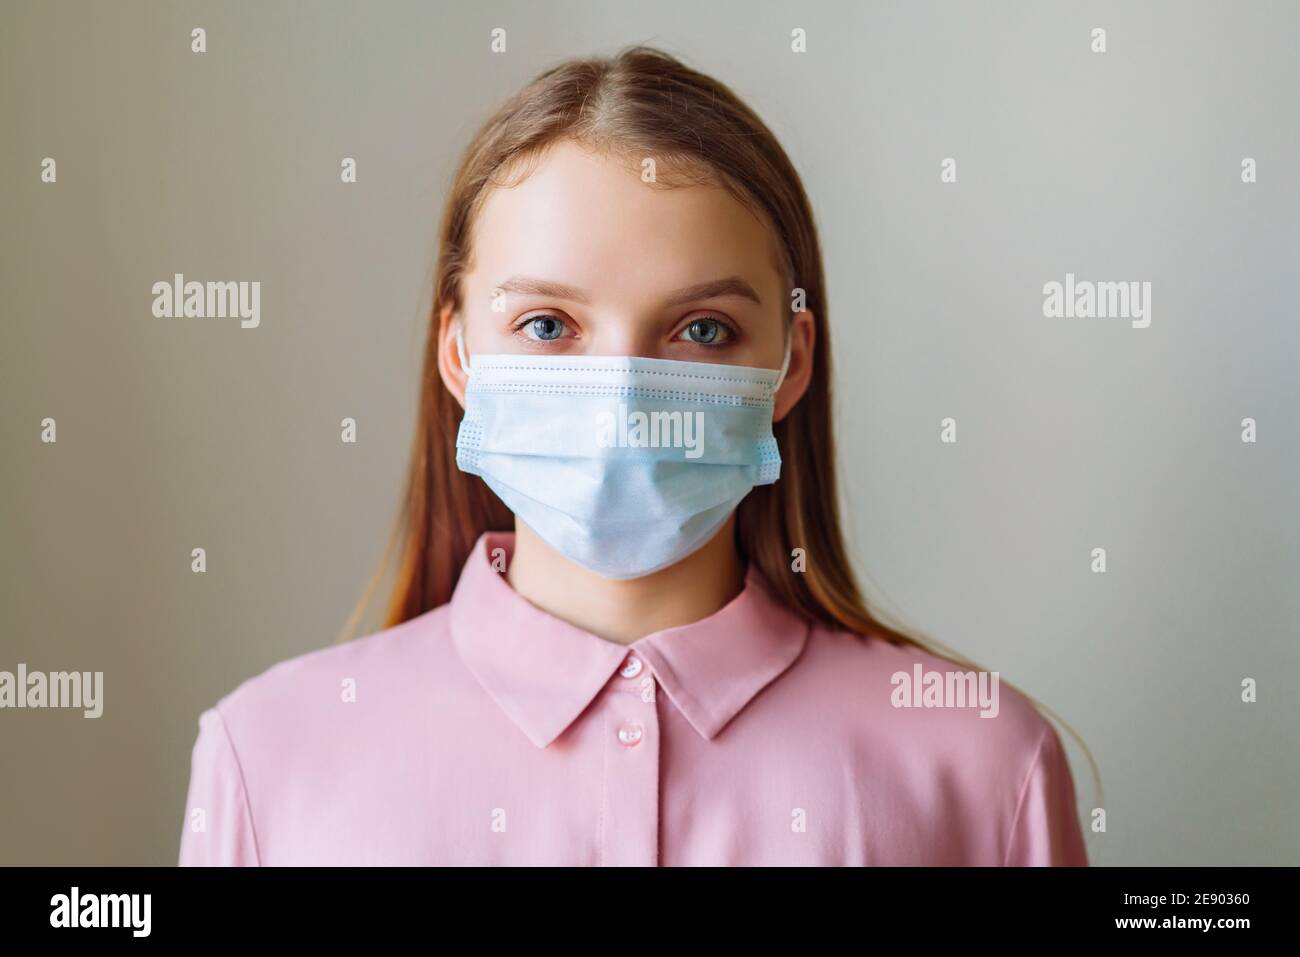 Woman wearing mask for protection from disease. Appeal to stay home. Coronavirus concept. Stock Photo